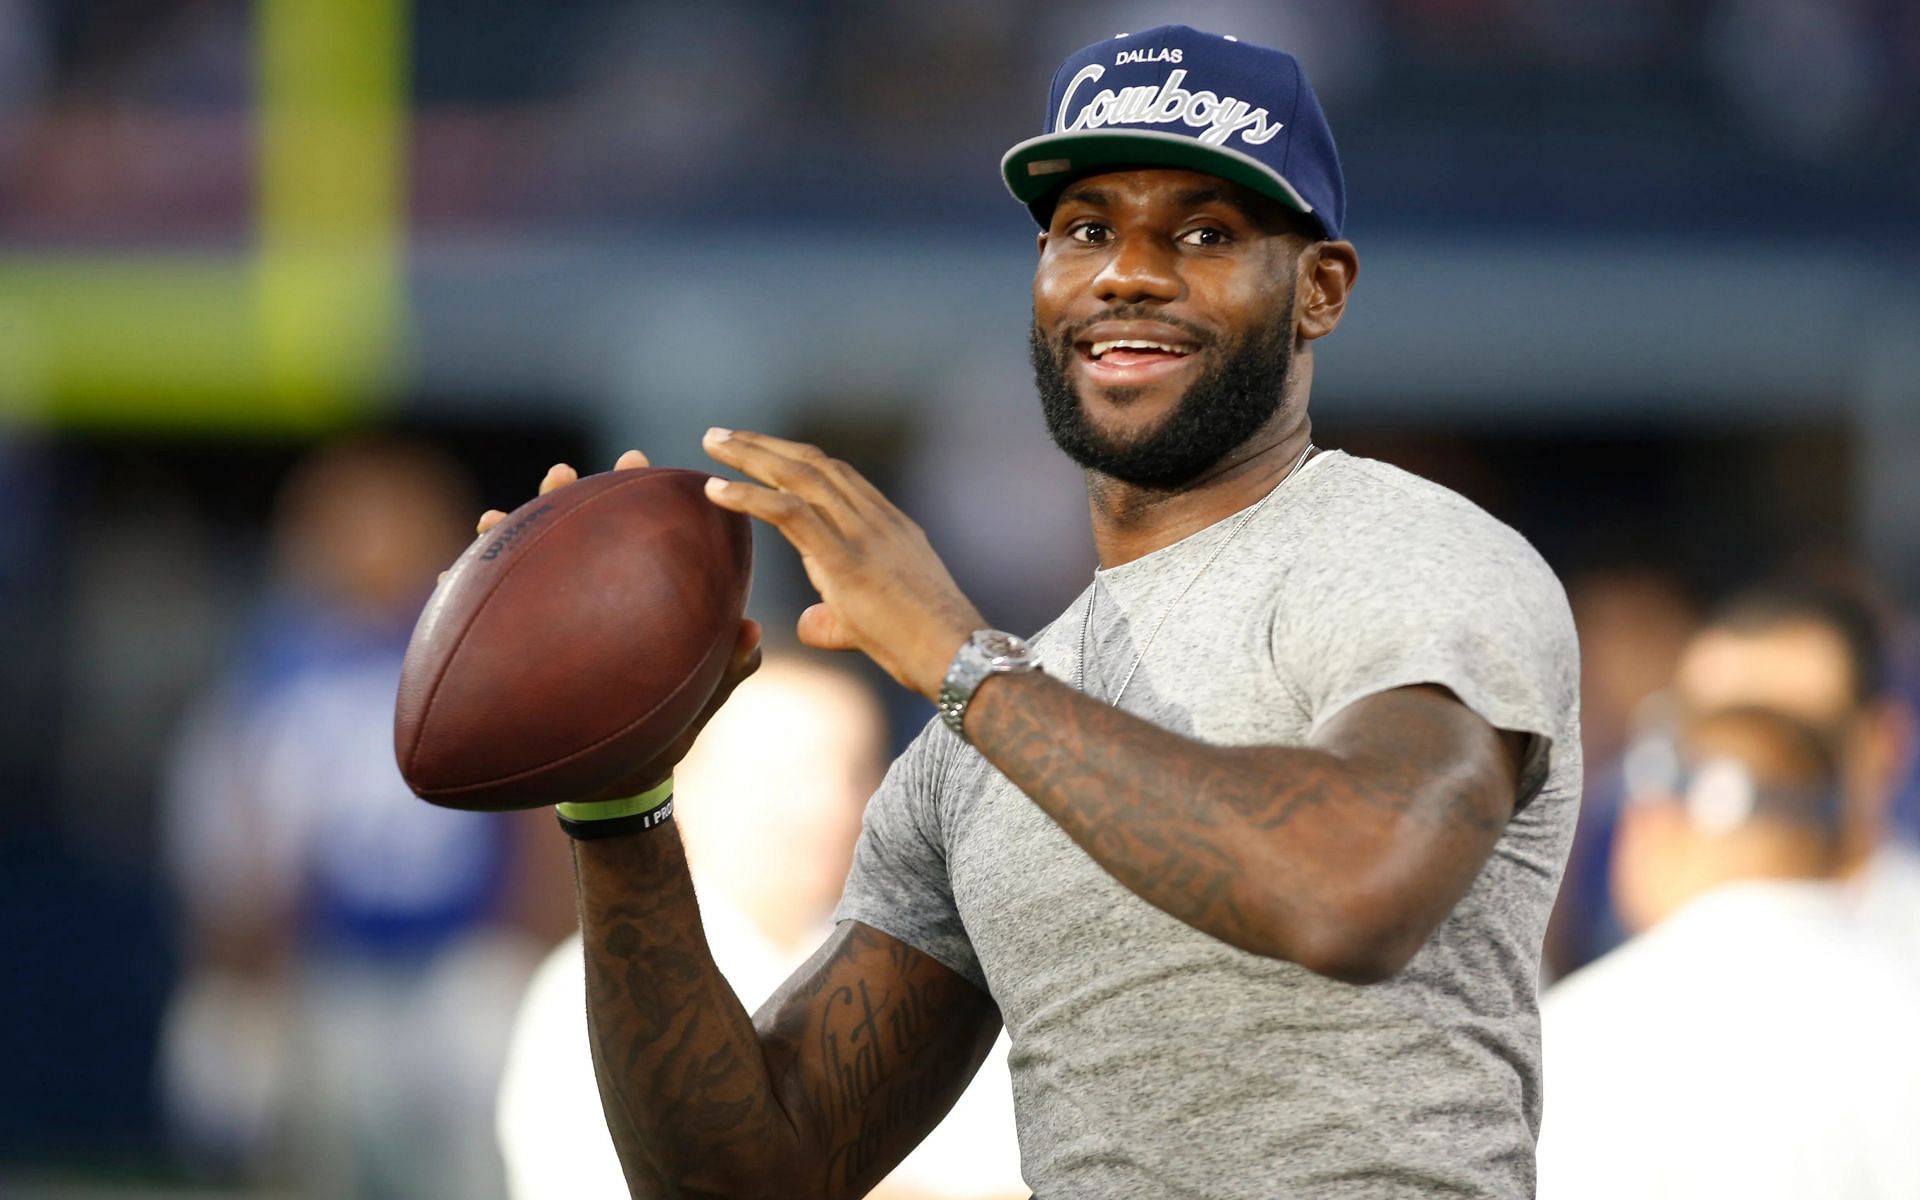 LeBron James in the NFL - Dallas Cowboys